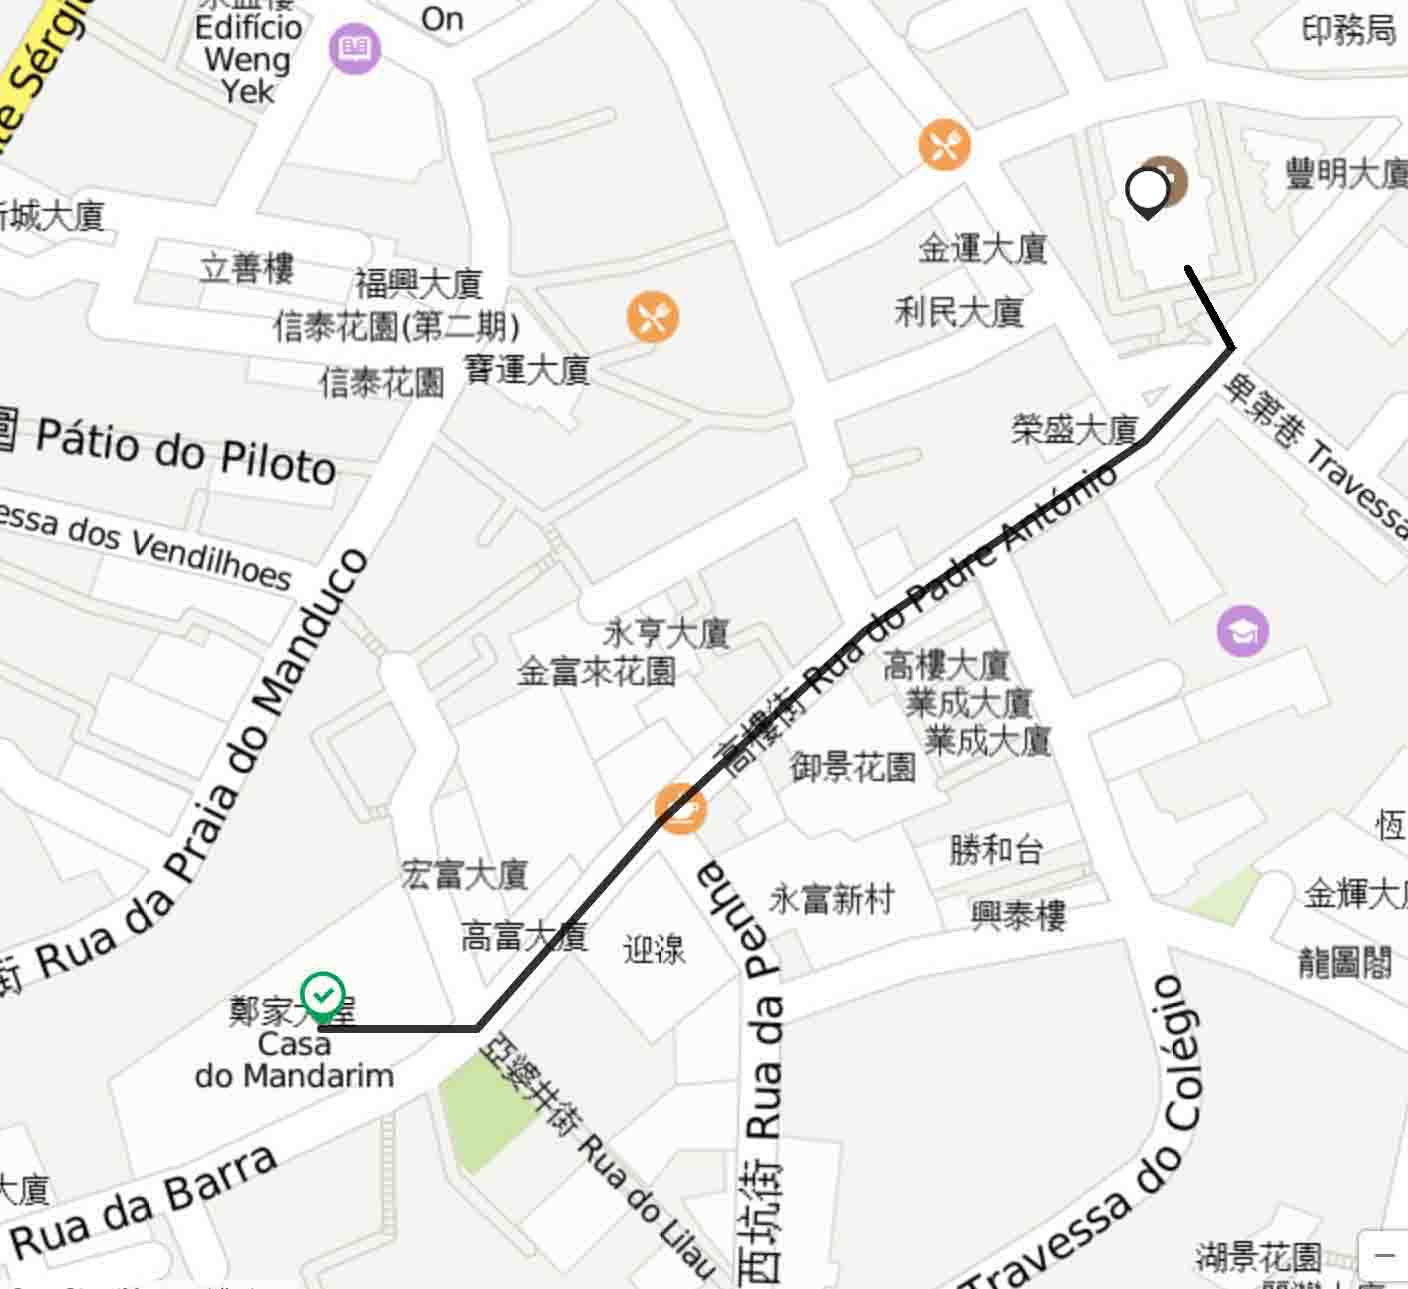 Directions to "Mandarin's House" by "St. Lawrence's Church"